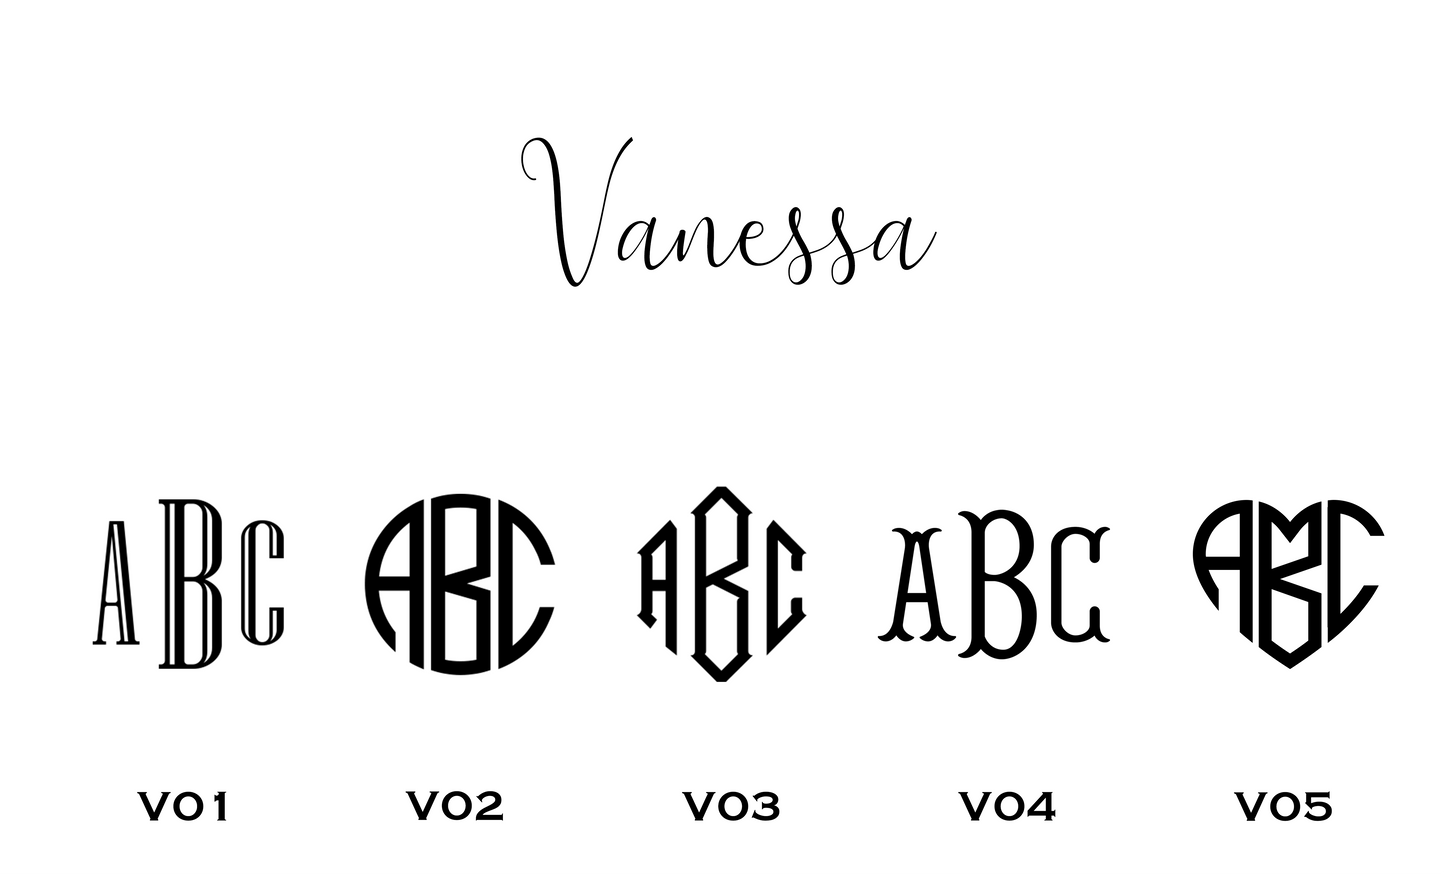 Vanessa Personalized Gift Cards